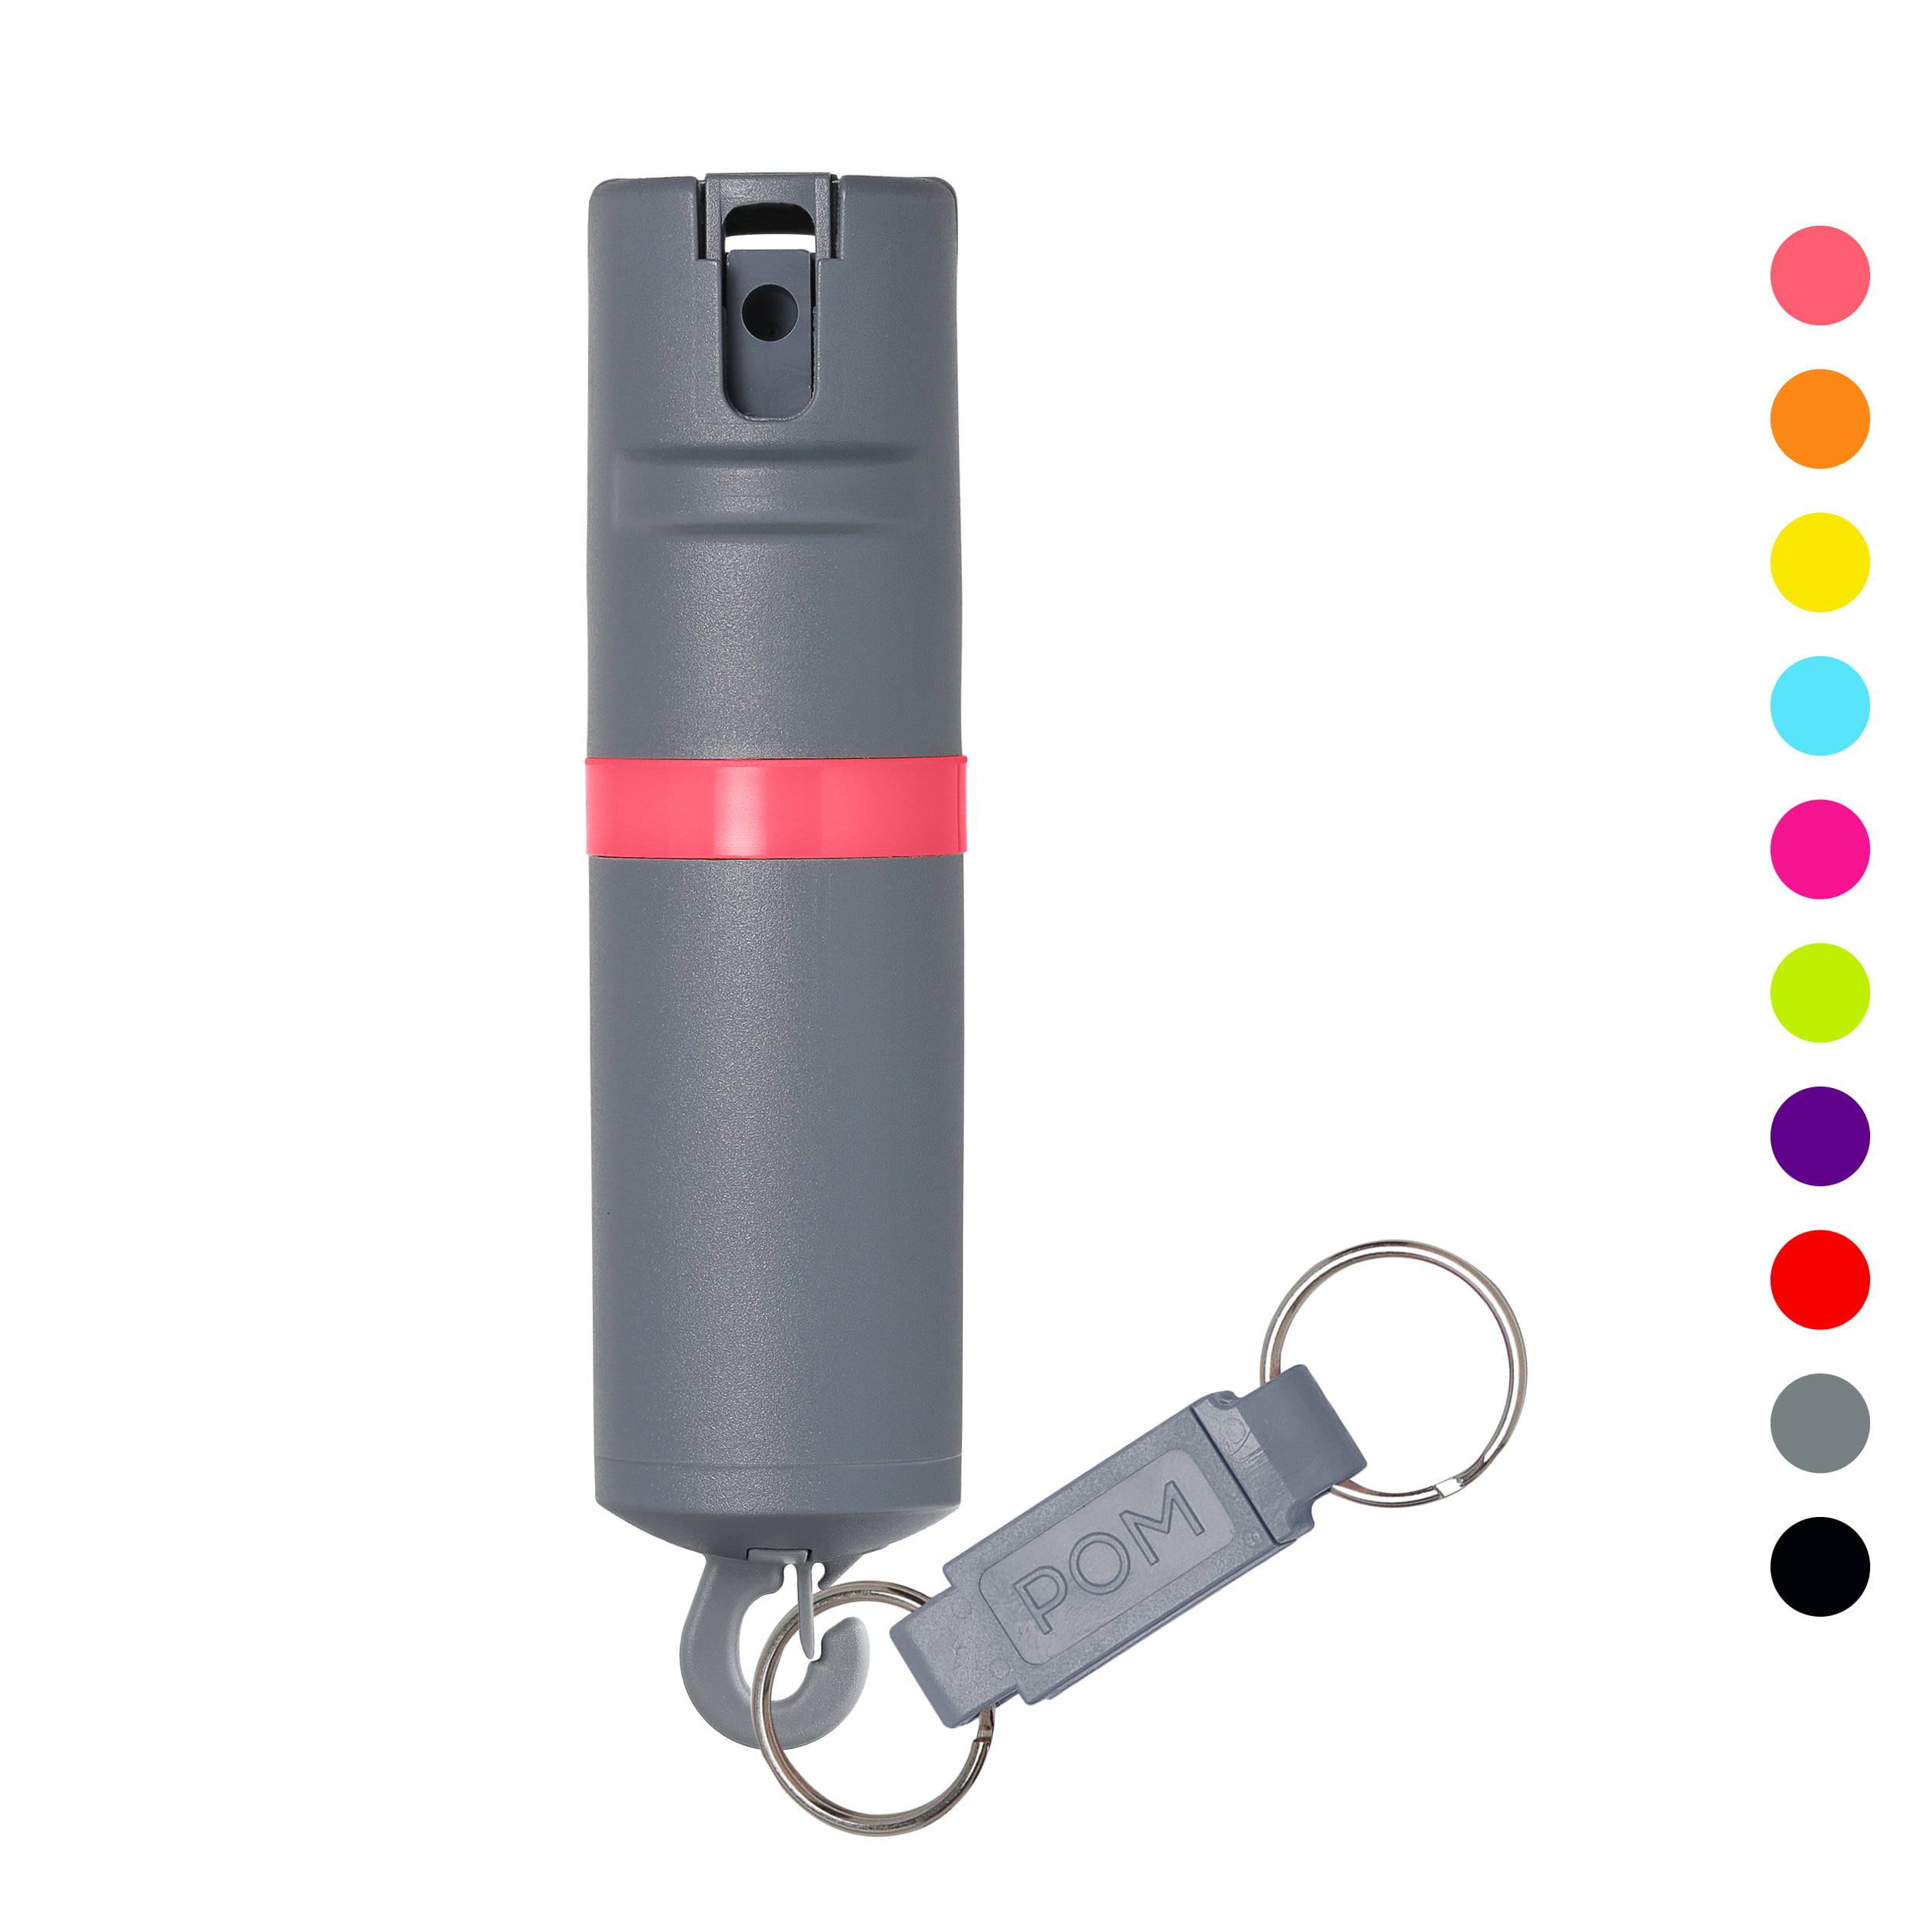 Quick Key Release Accurate Stream Pattern POM Pepper Spray Flip Top Keychain 25 Bursts & 10 ft Range Maximum Strength OC Spray Self Defense Tactical Compact & Safe Design